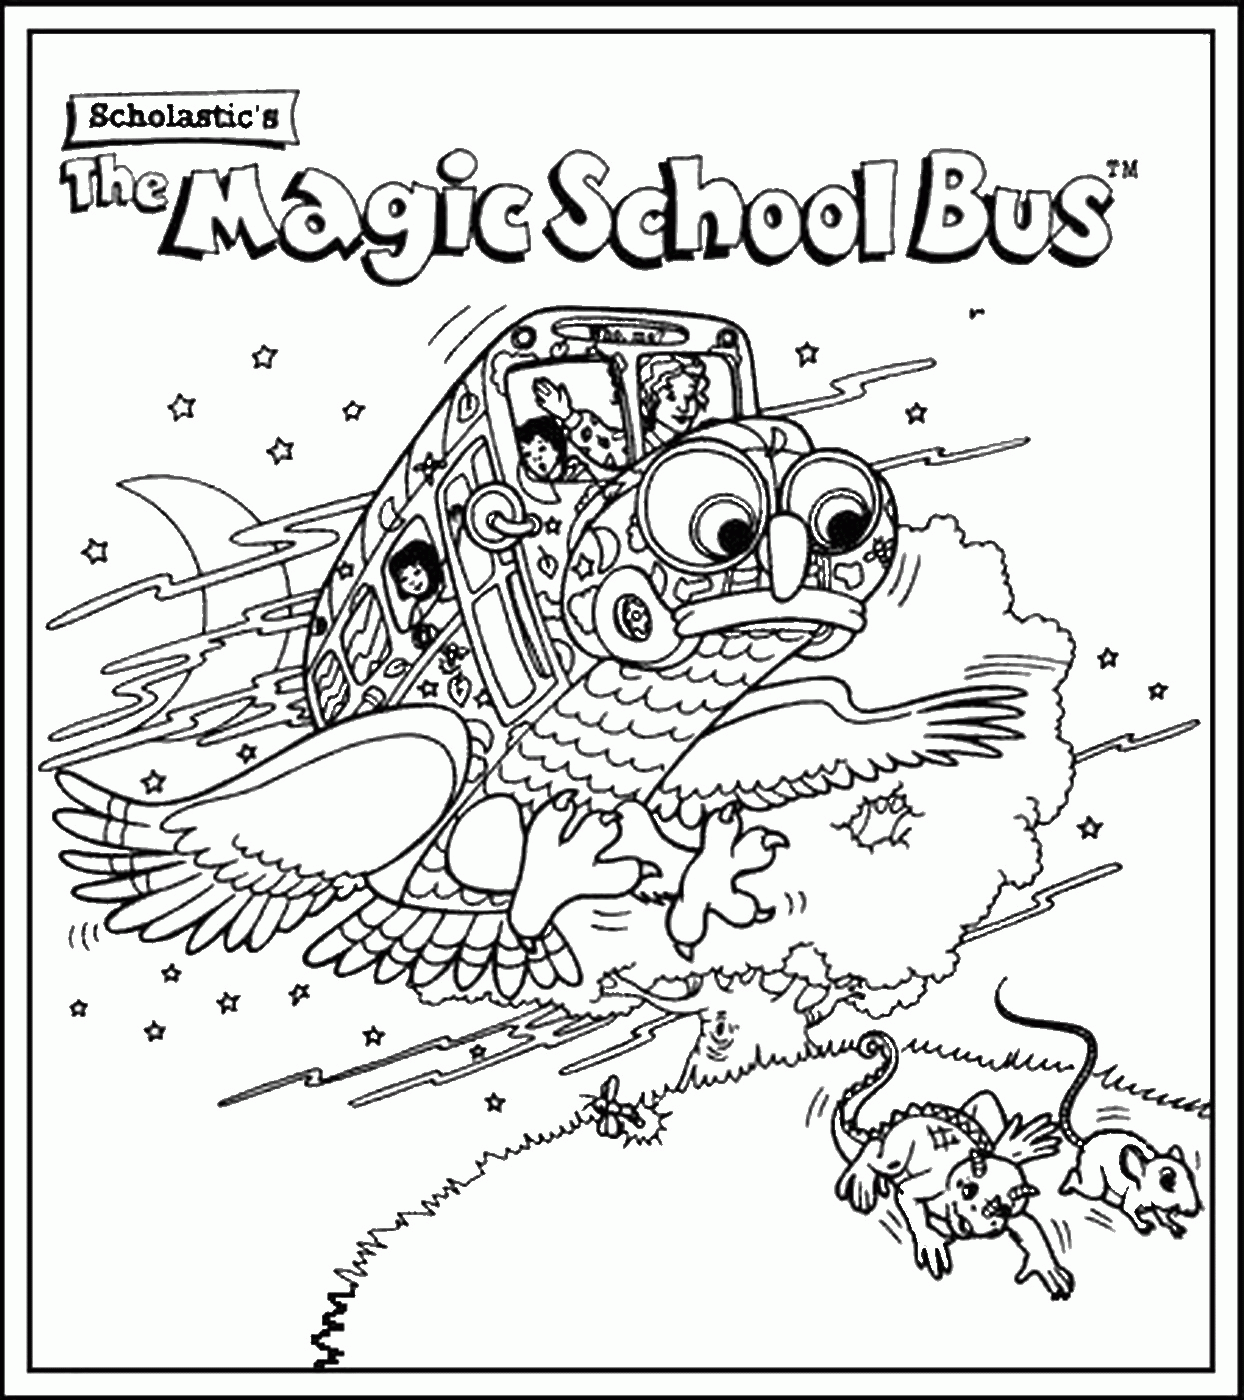 Magic School Bus Coloring - Coloring Pages for Kids and for Adults